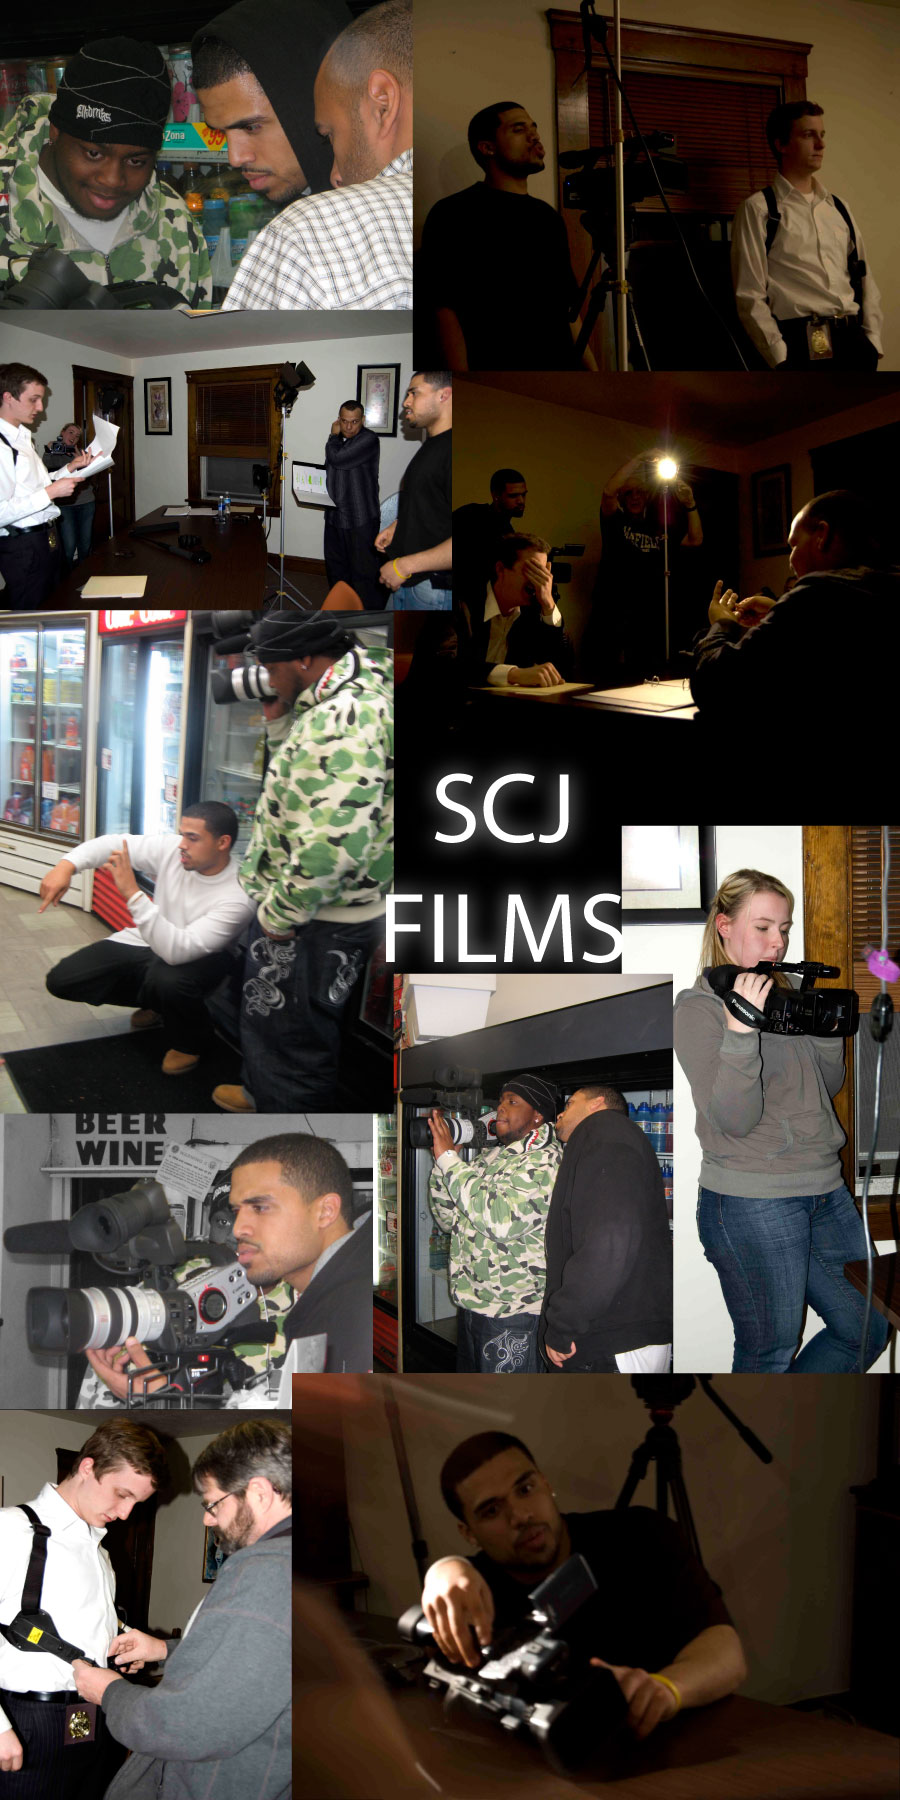 From the BW archives, an "SCJ Films" collage of Steven Caple Jr. and some of his BW classmates and professors at work.